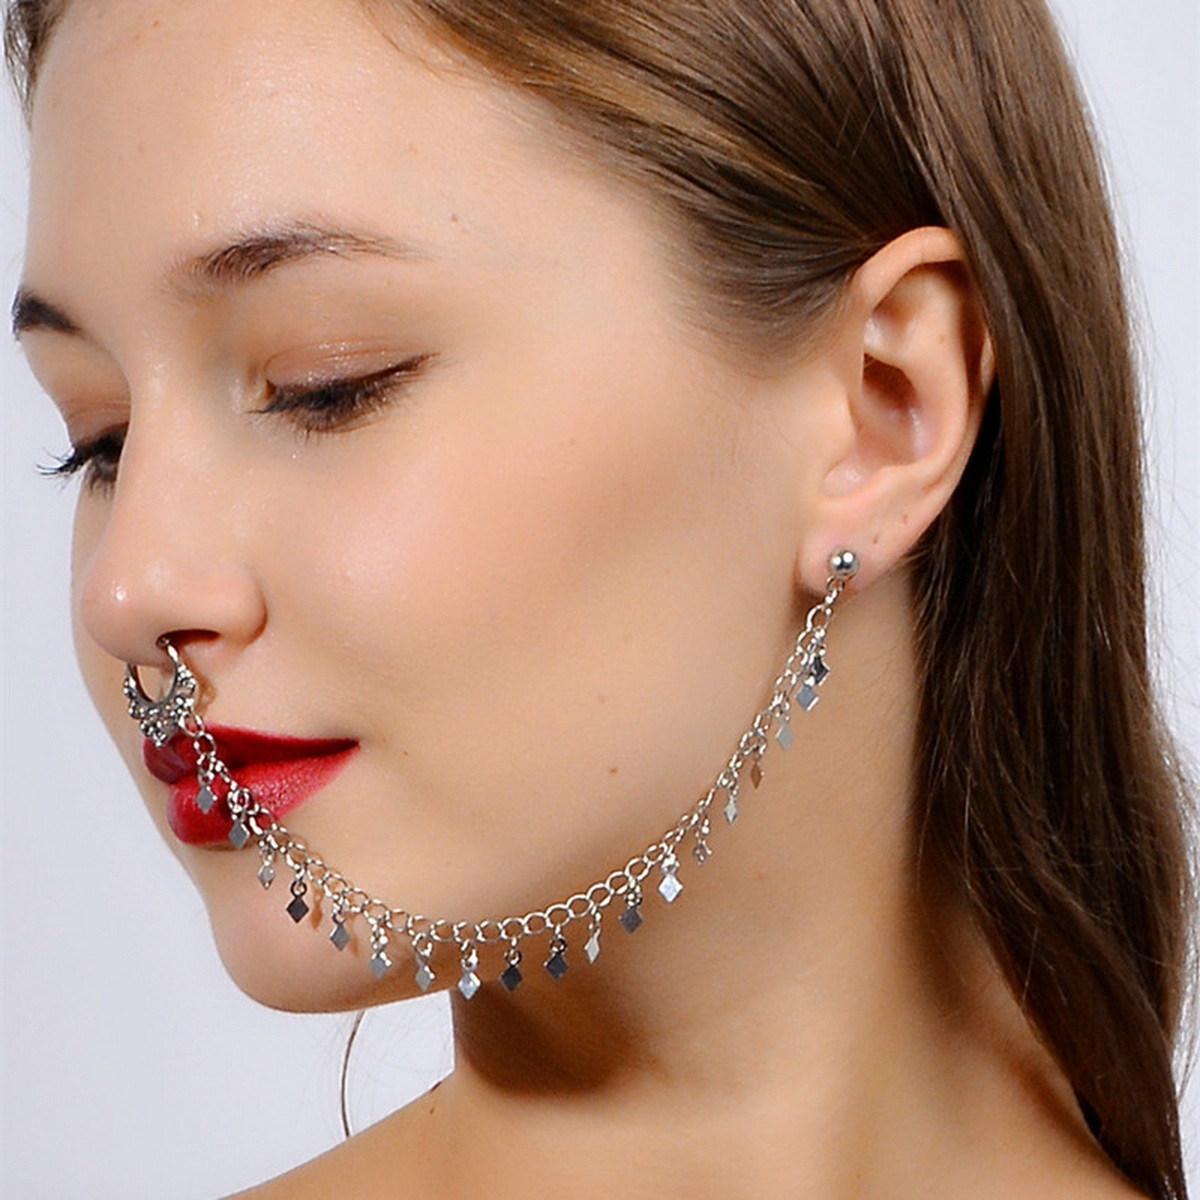 Body Jewelry Nose
 Fashion Piercing Nose Ring Unique Personalized Punk Style